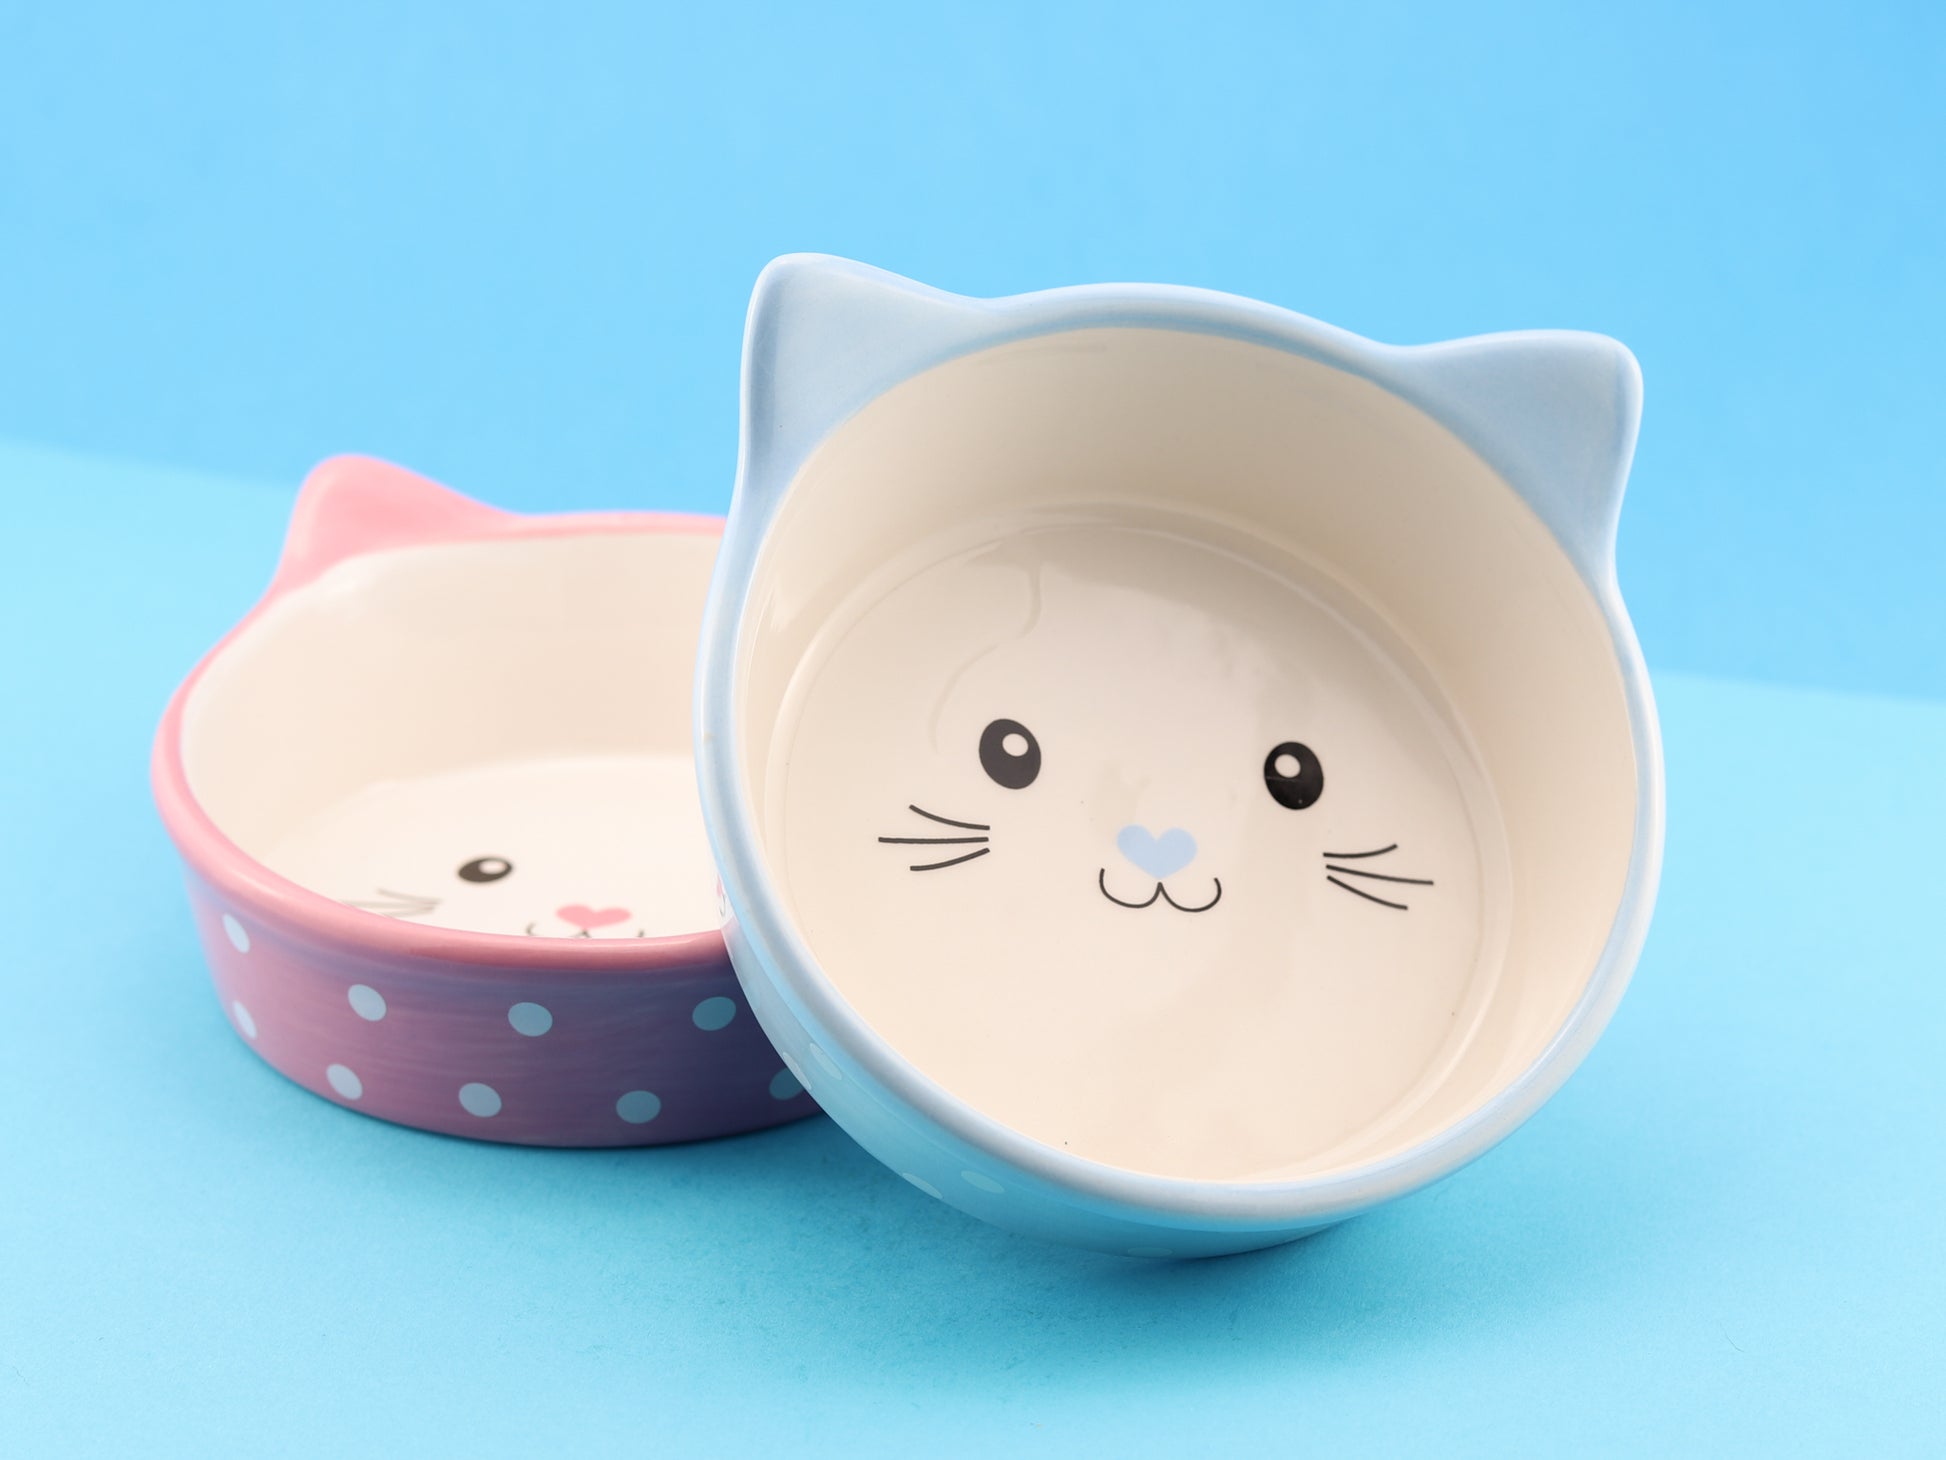 Ceramic cat face bowls in two colours. Pink & blue, with white polka dots and a cute cat face in the centre of the bowl